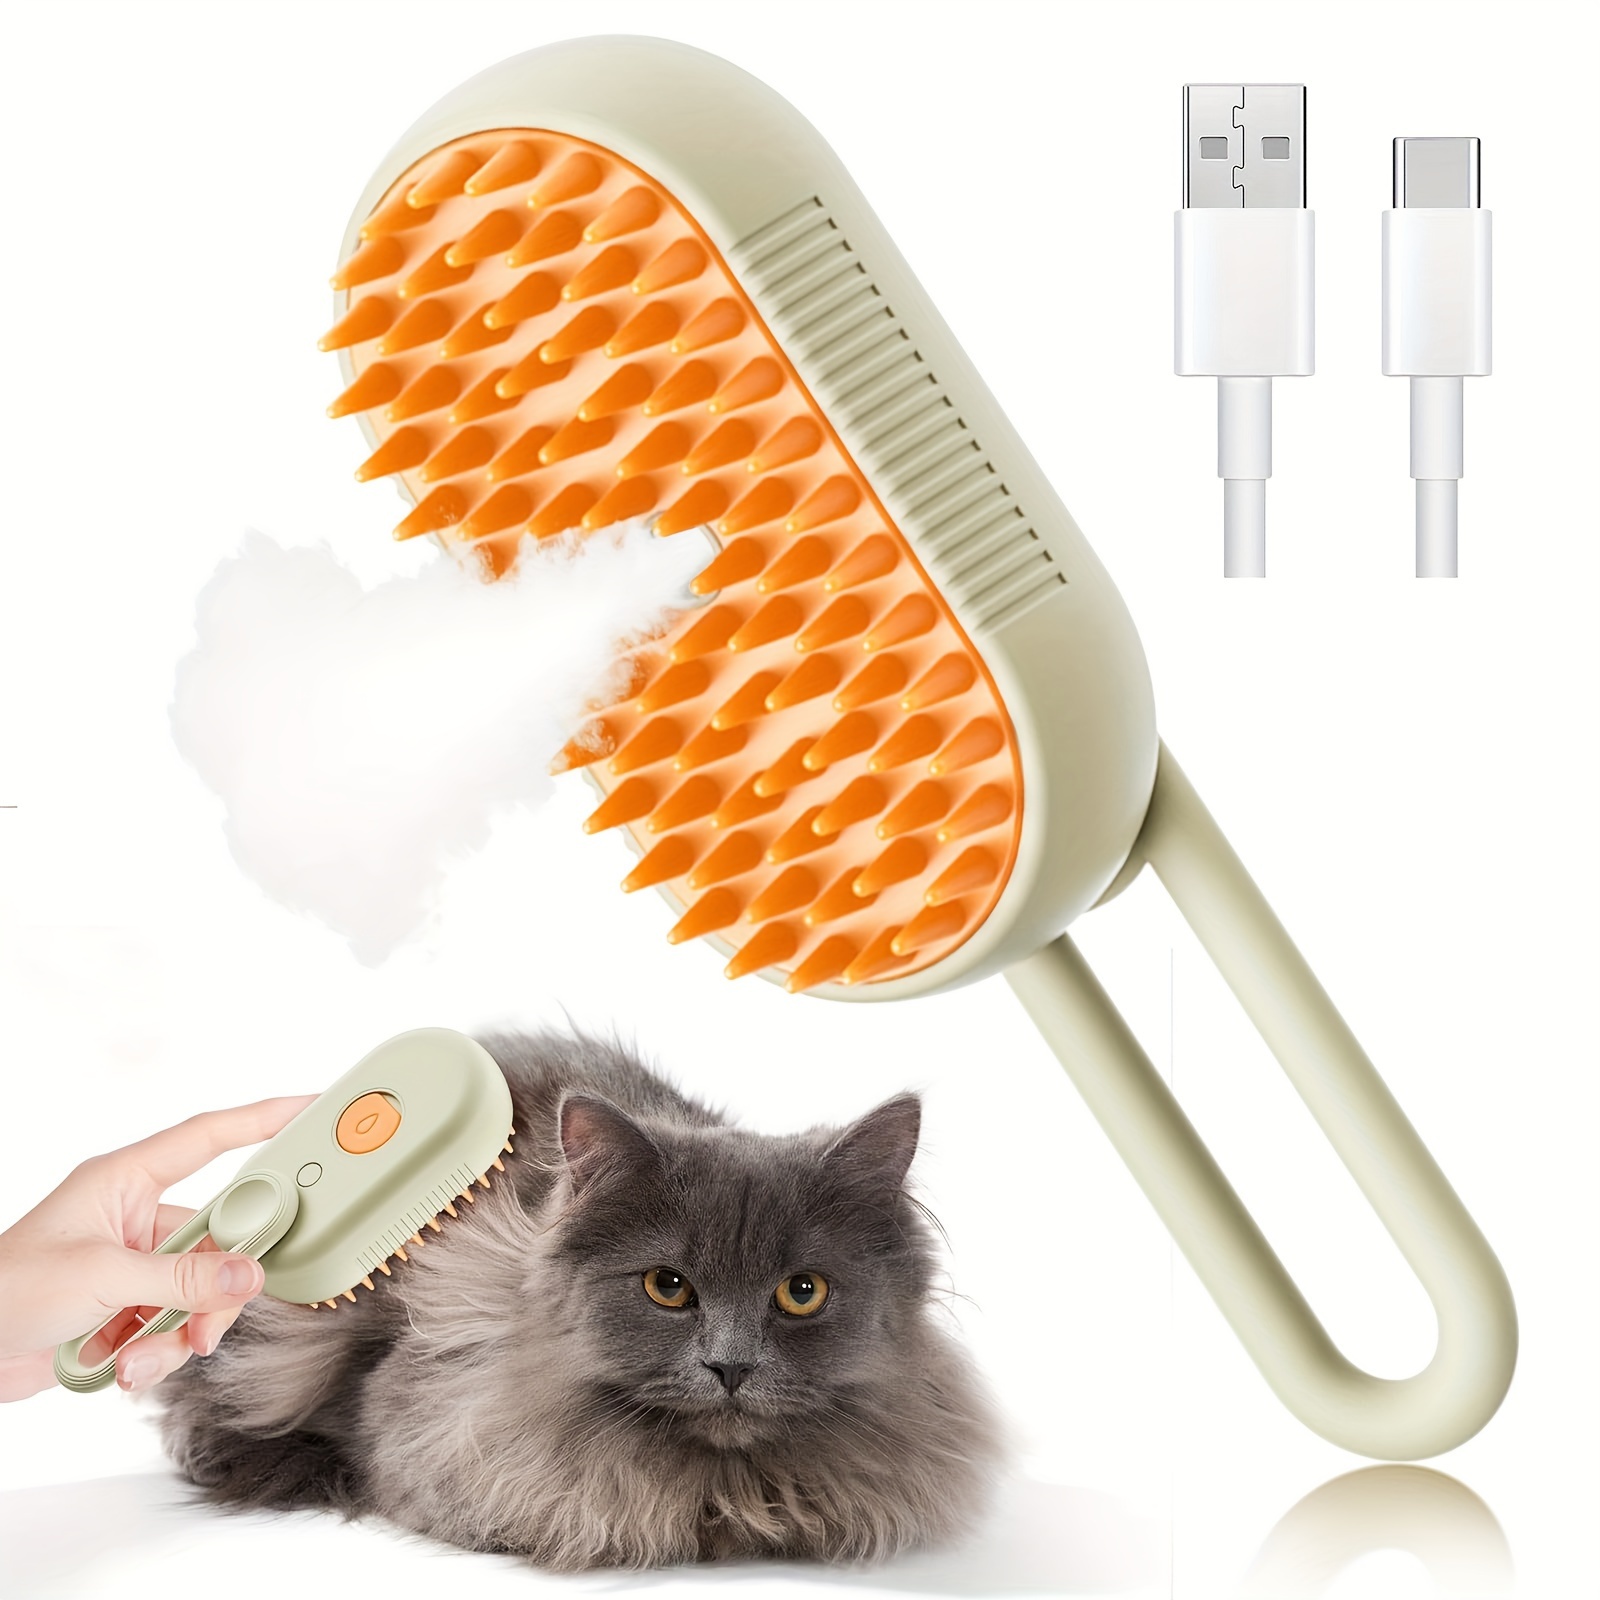 

Steamy Cat Brush, 3 In 1 Cat Steamy Brush, Cat Brush Massaging Comb, Usb Recharging Pet Grooming Comb Hair Removal Combs Pet Supplies